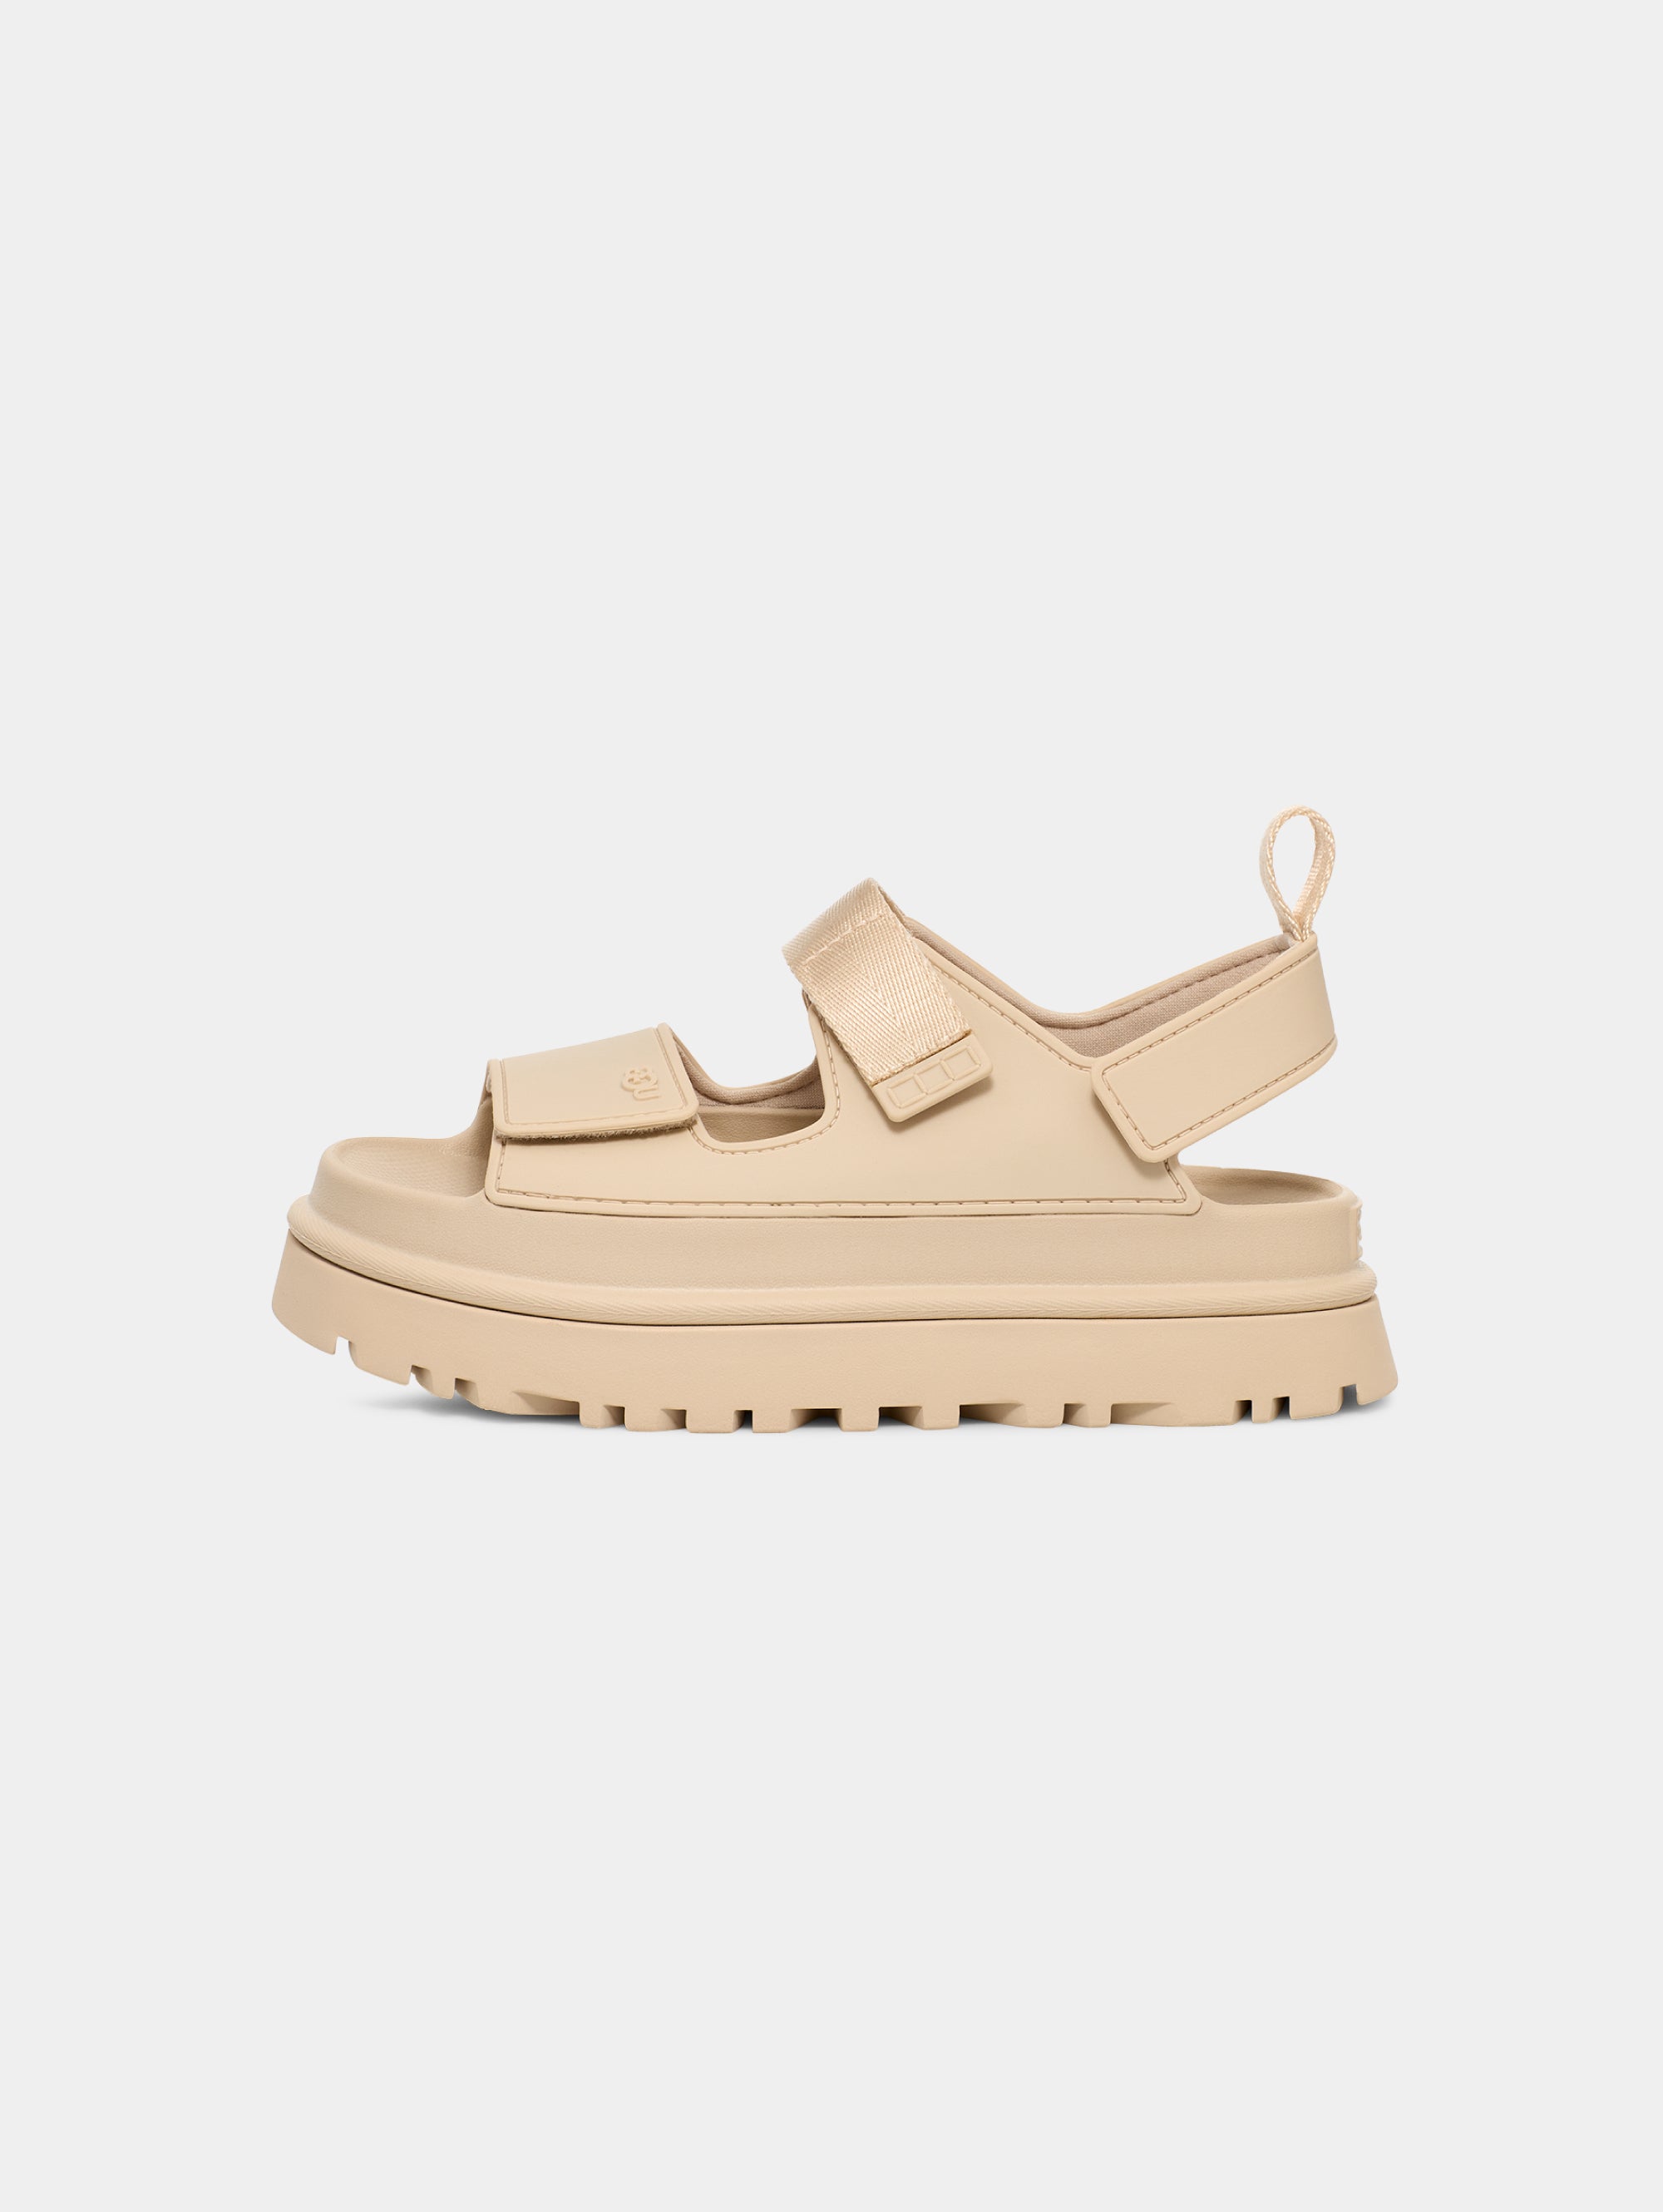 UGG-Sandali GoldenGlow in Materiale Riciclato Sabbia-TRYME Shop